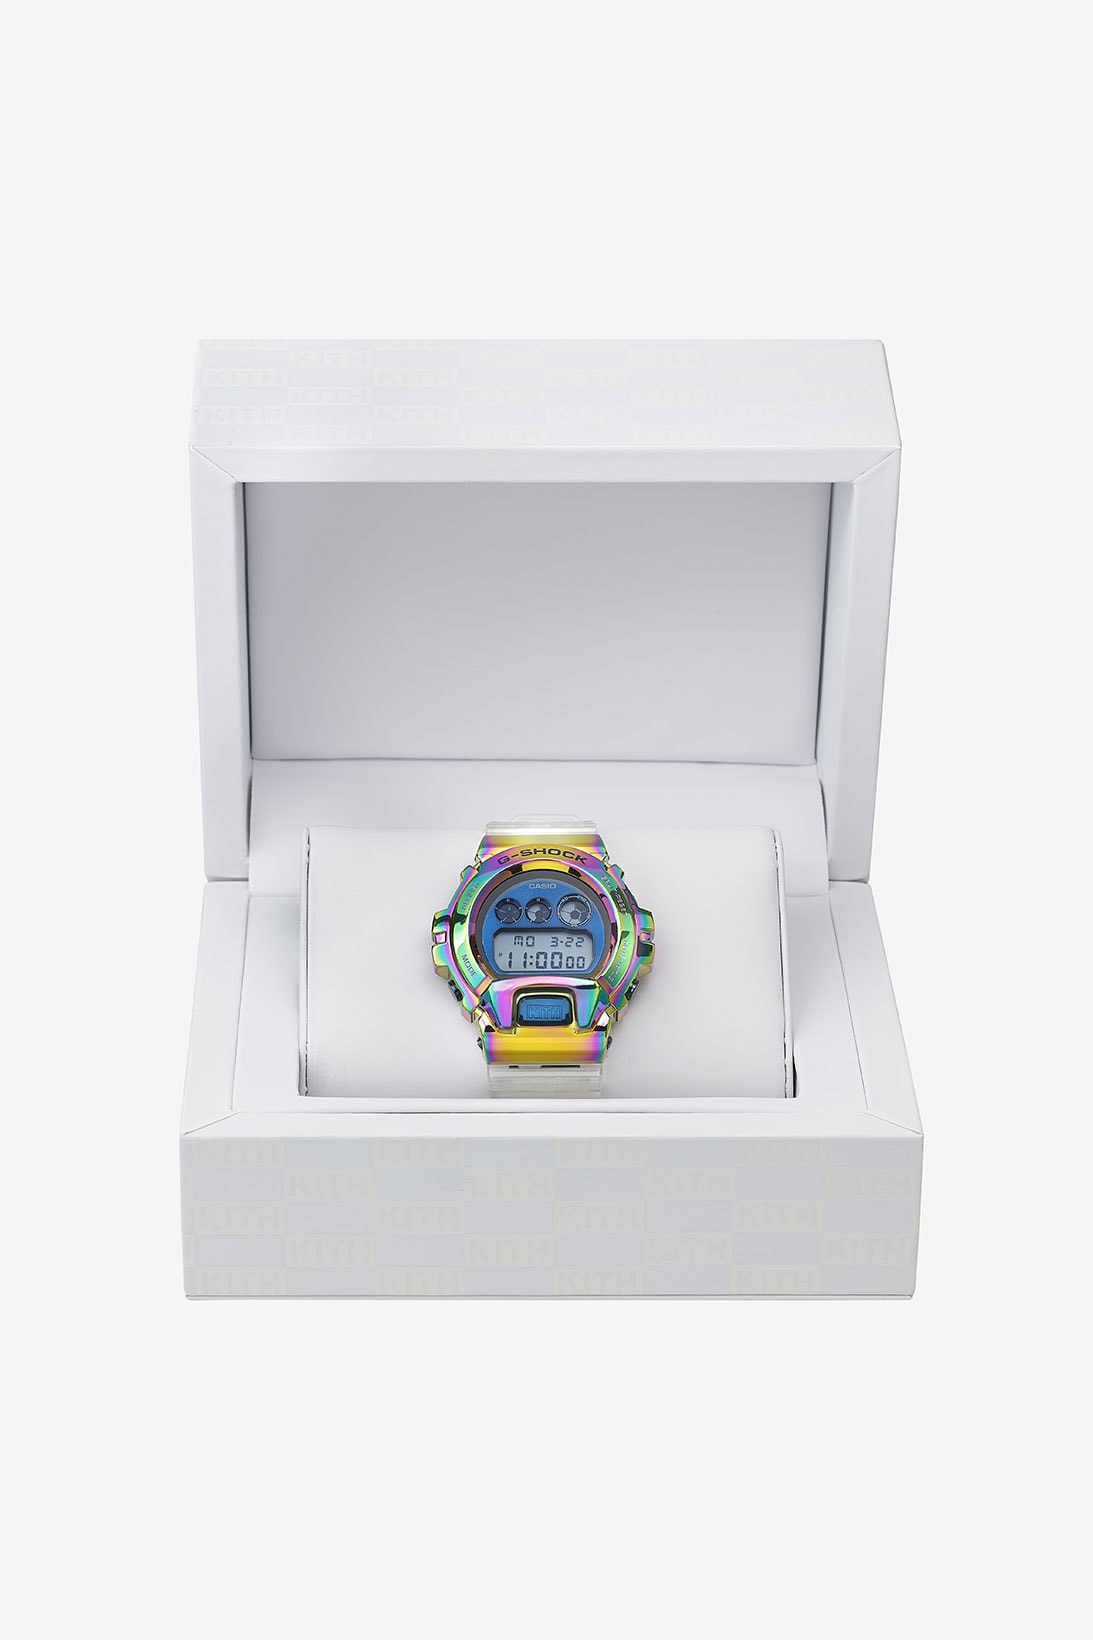 kith g-shock gm-6900 rainbow watches collaboration box packaging